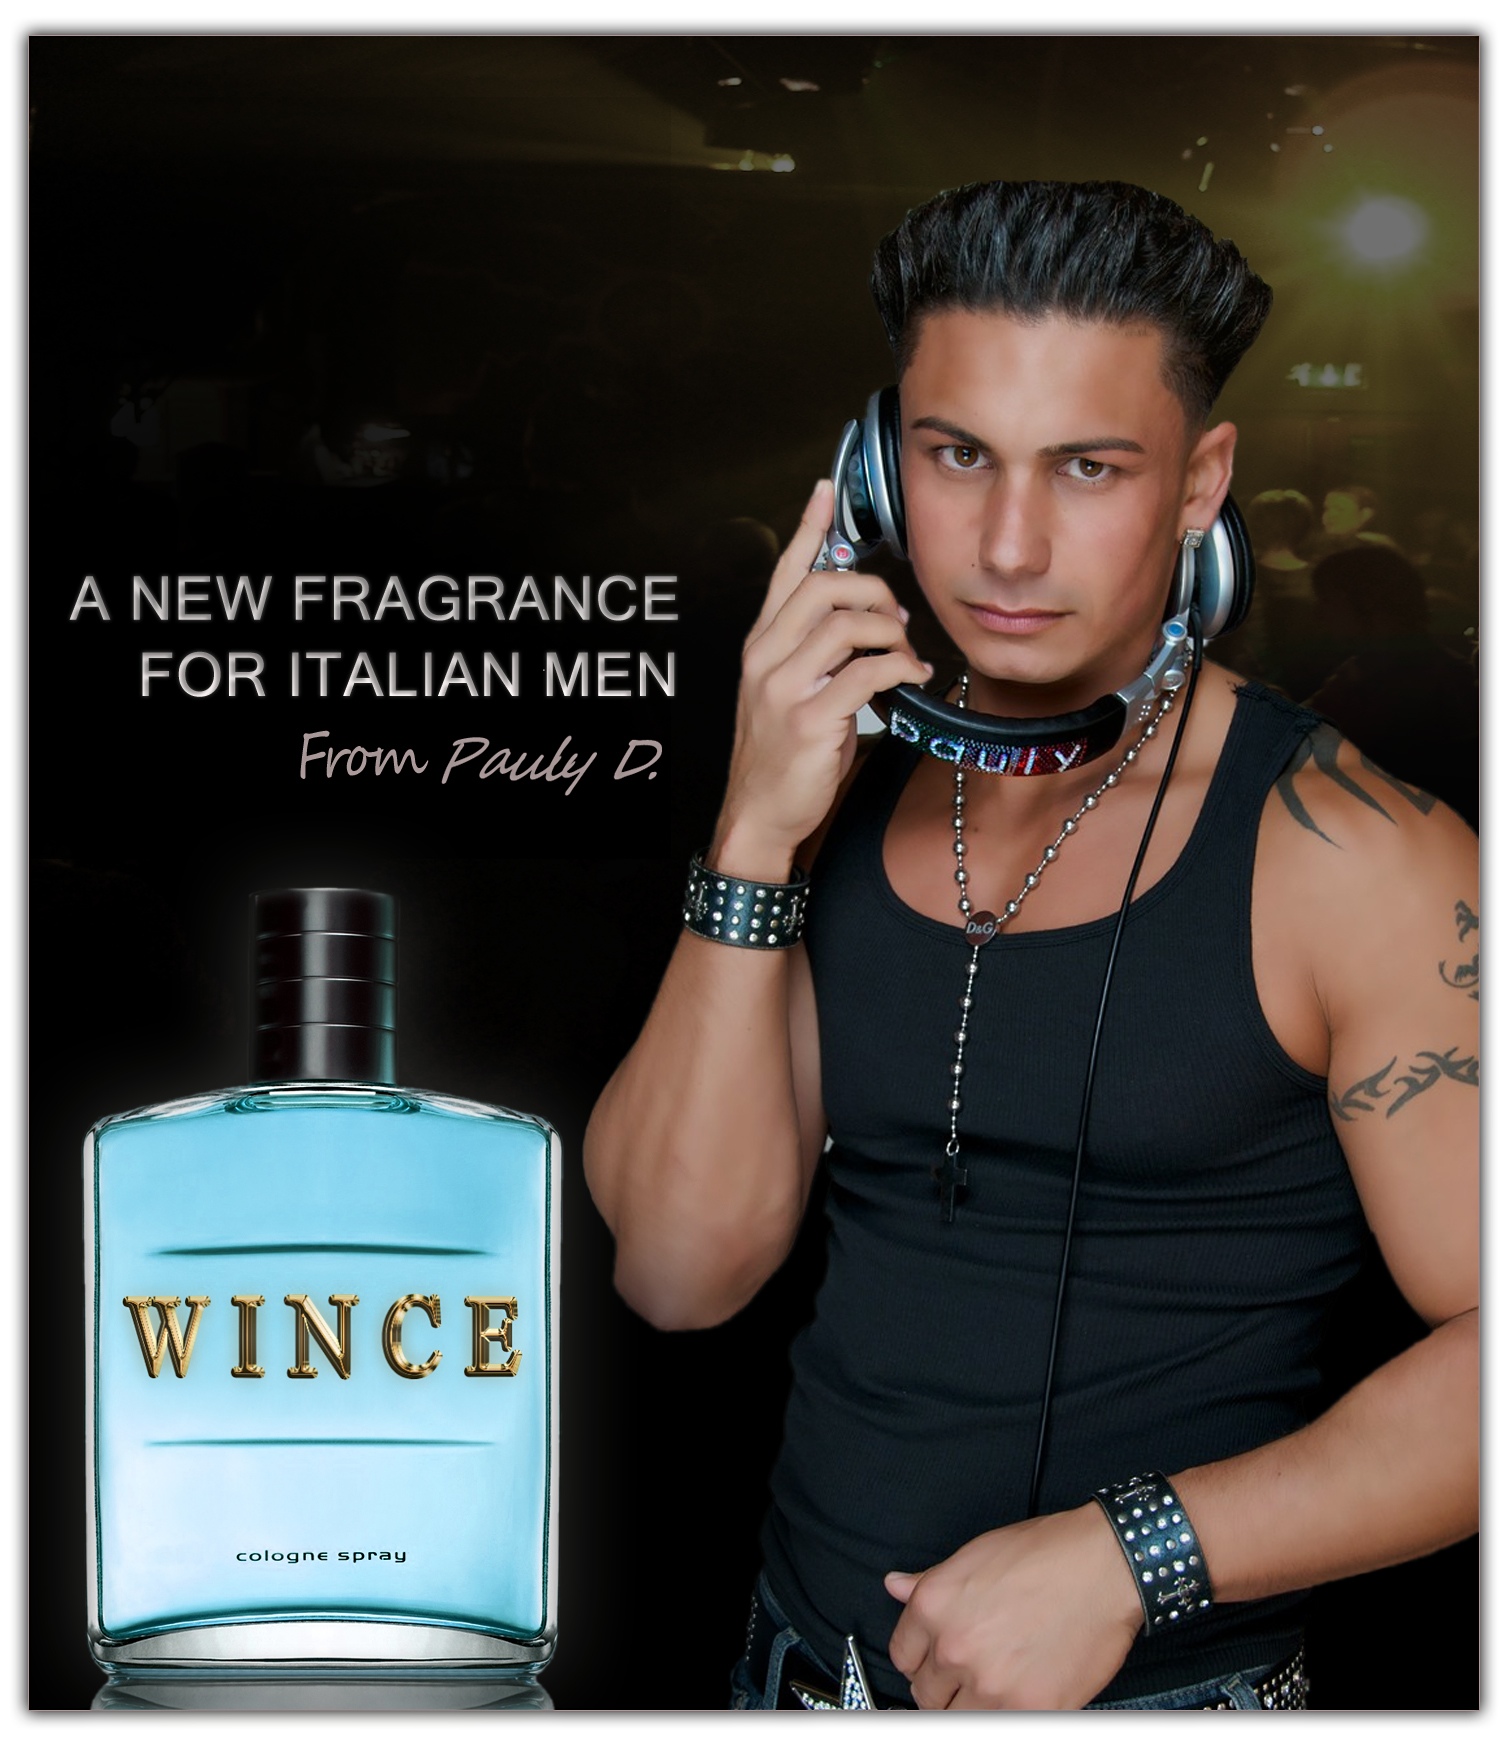 Pauly D's Cologne